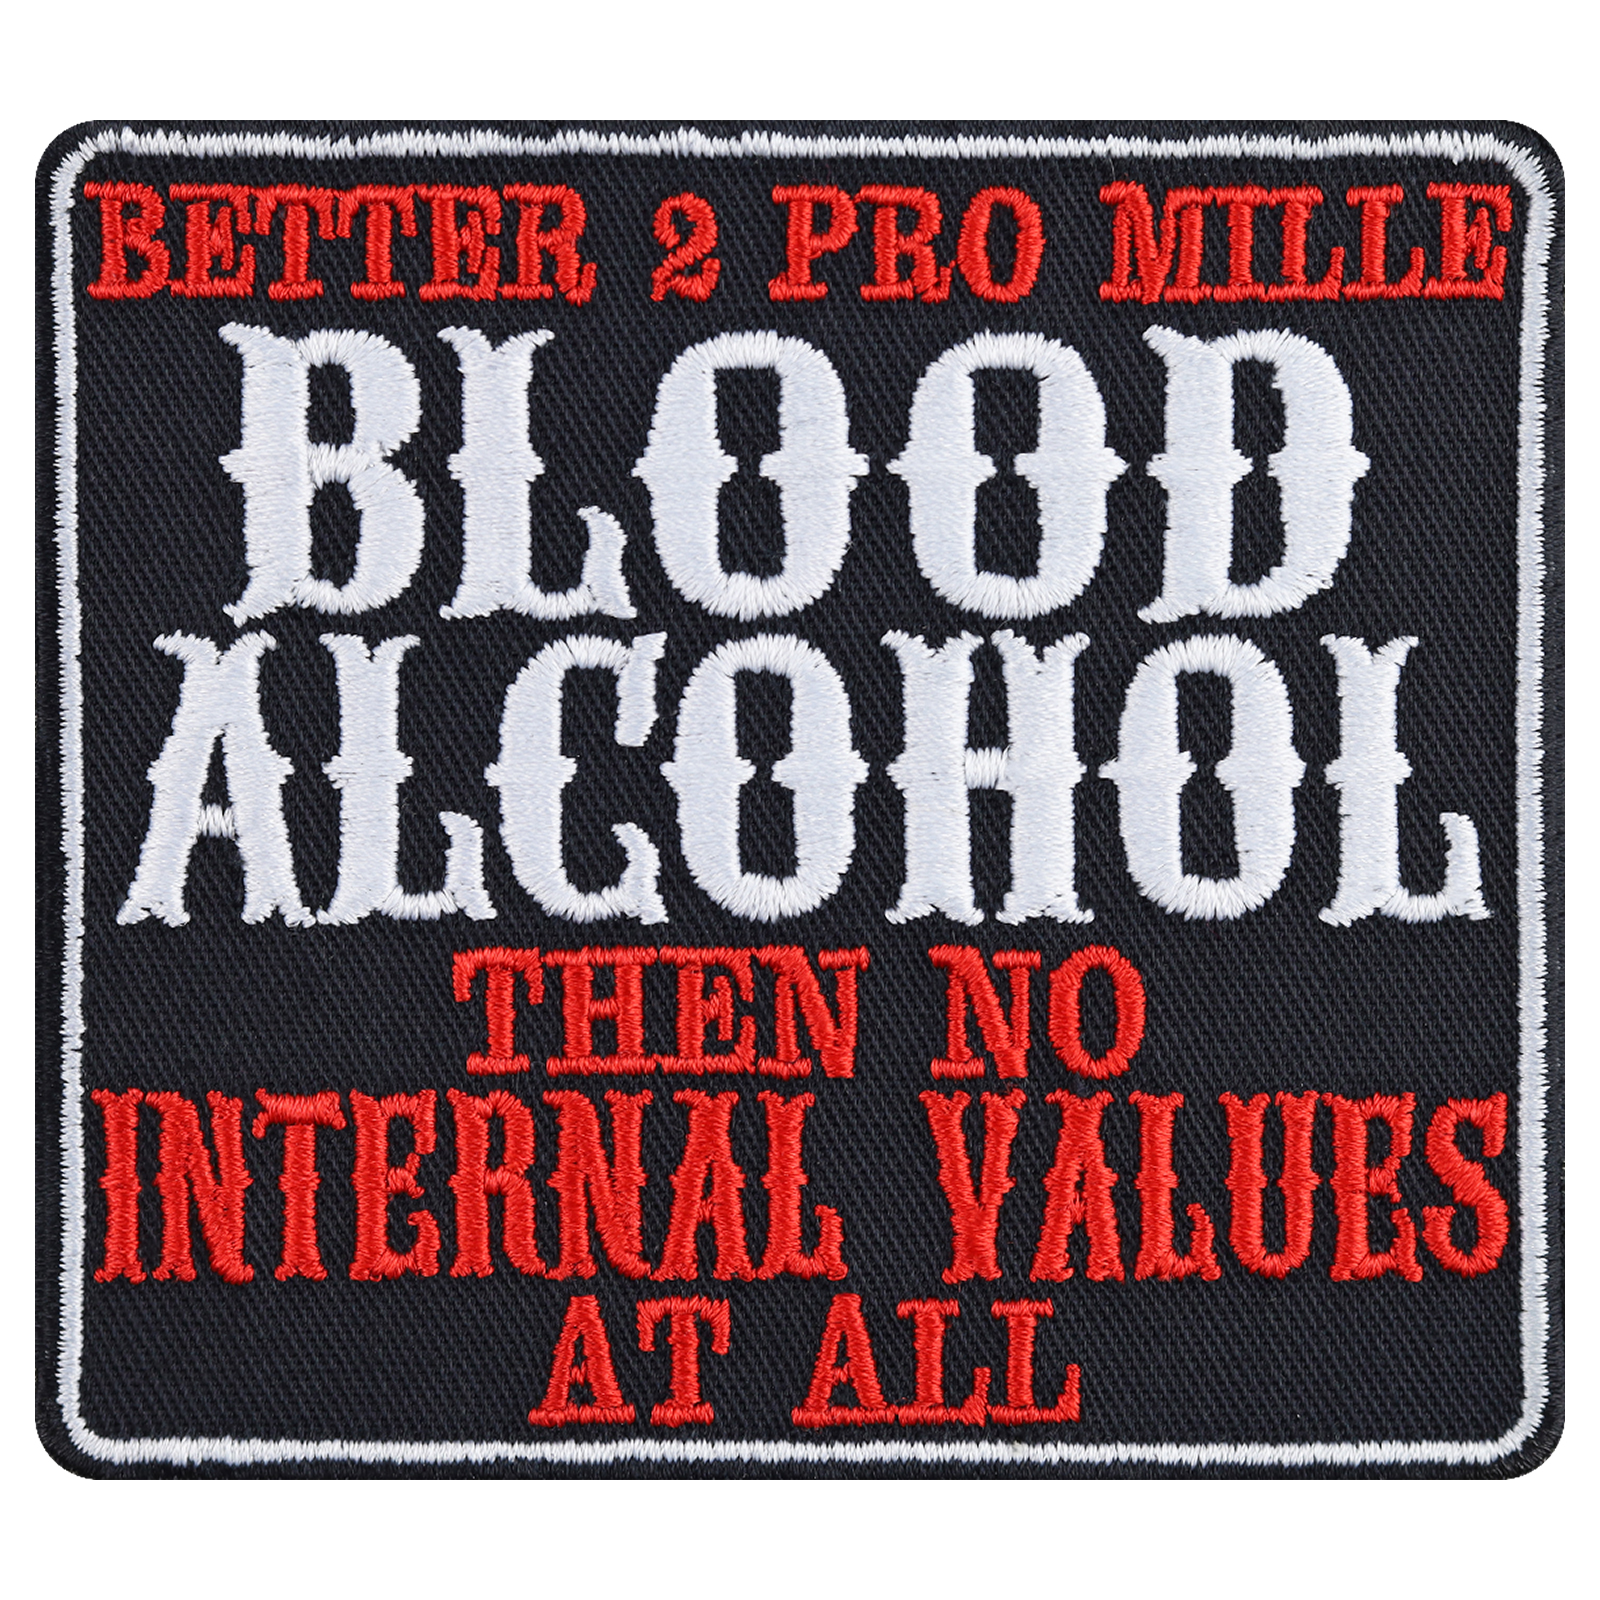 Better 2 pro mille blood alcohol than no internal values at all - Patch